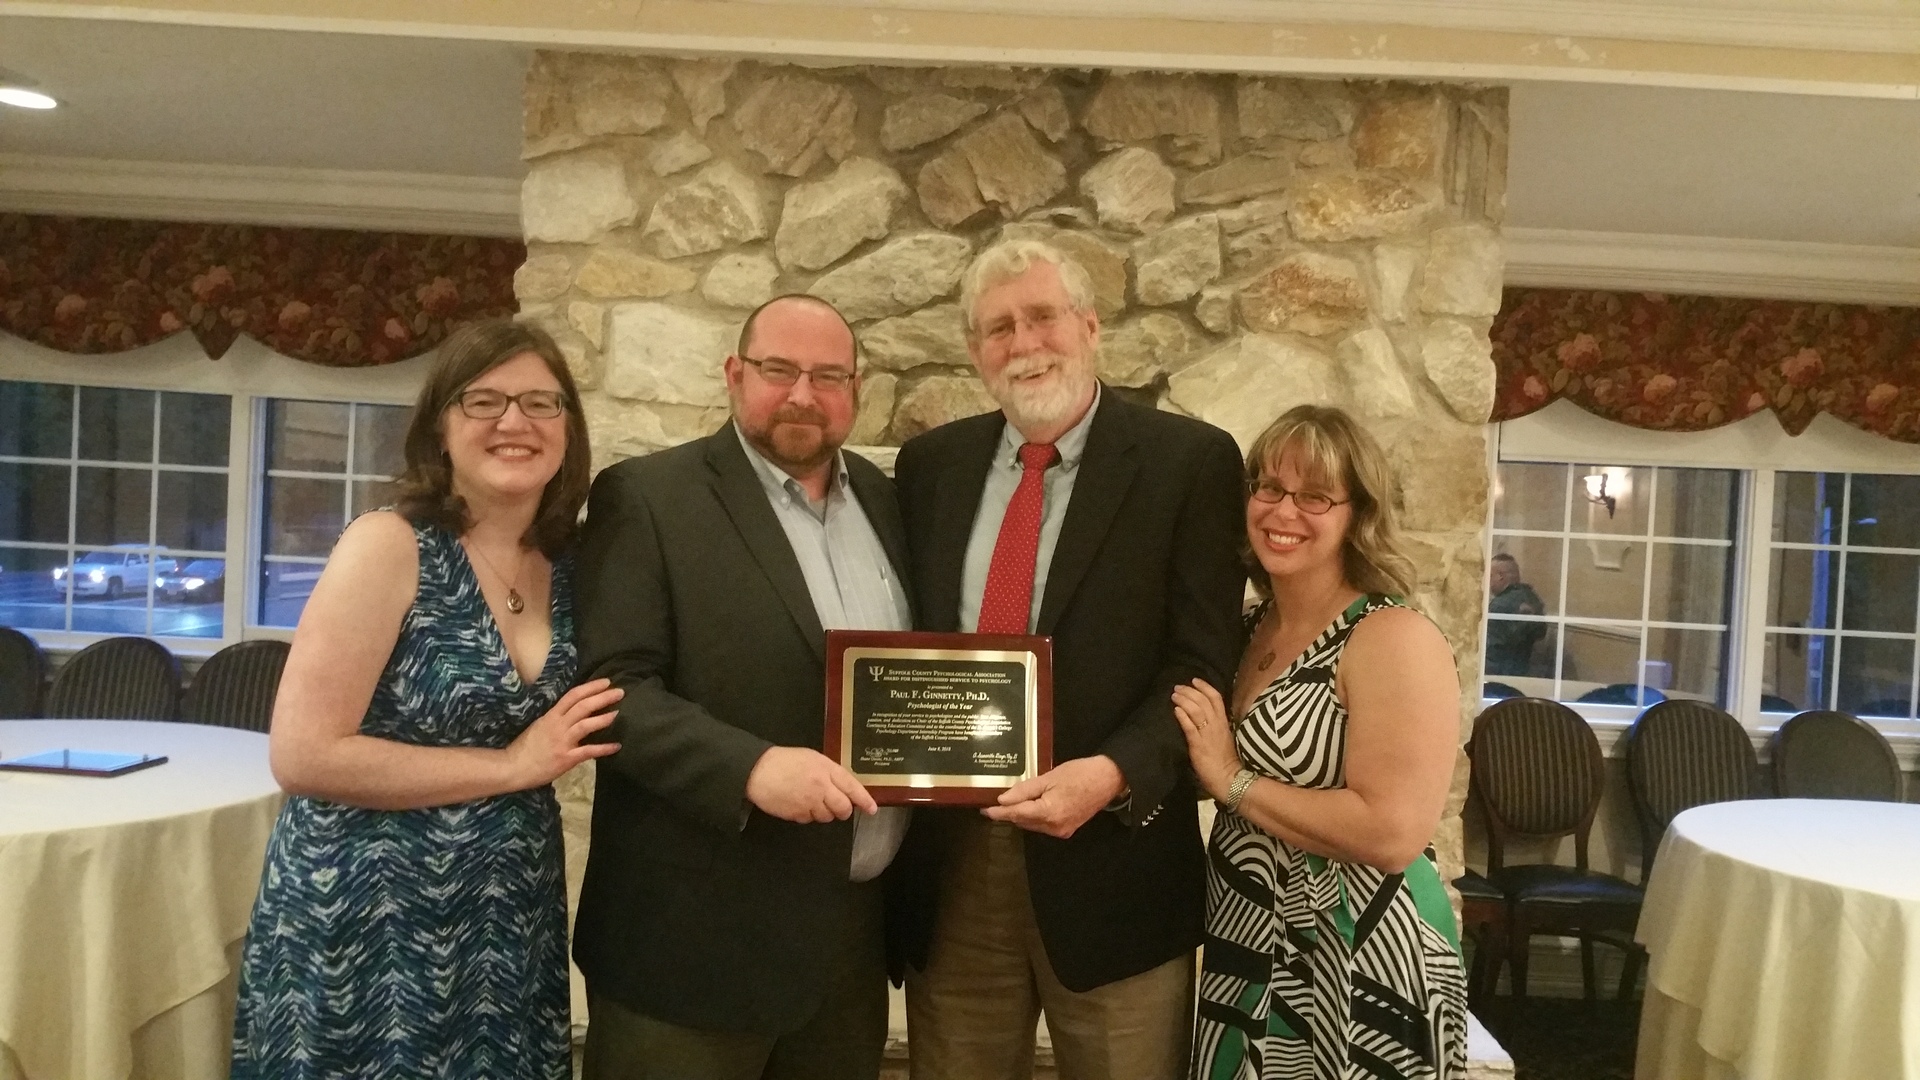 Dr. Paul Ginnetty receiving SCPA's Psychologist of the Year award.